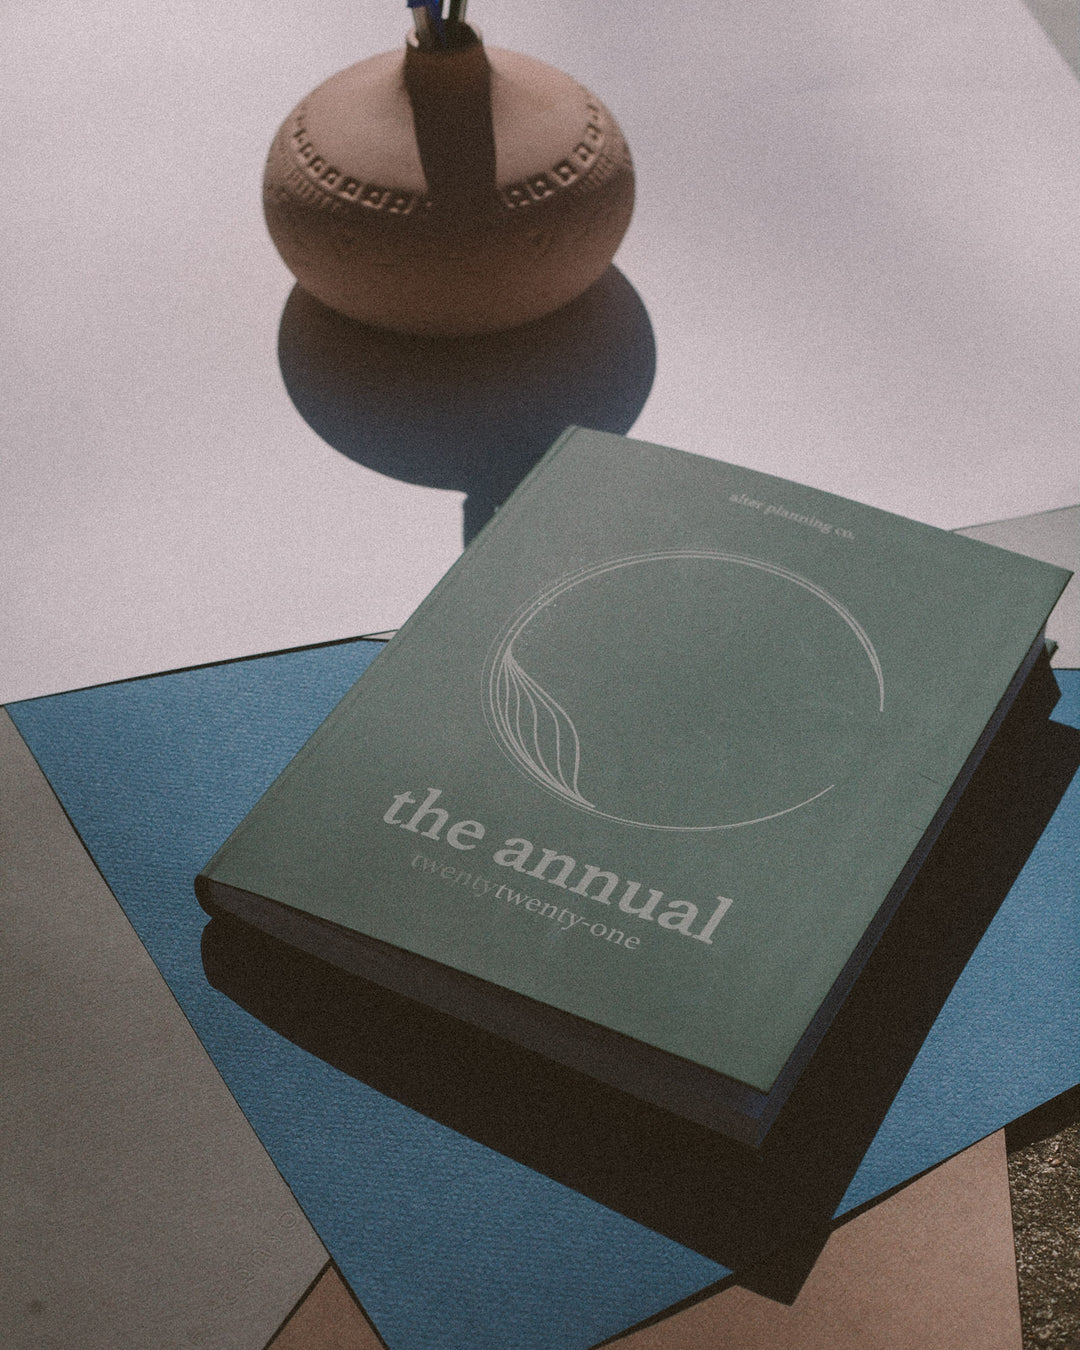 image of alter planning co. product "The Annual" in green, on a blue and white background. 